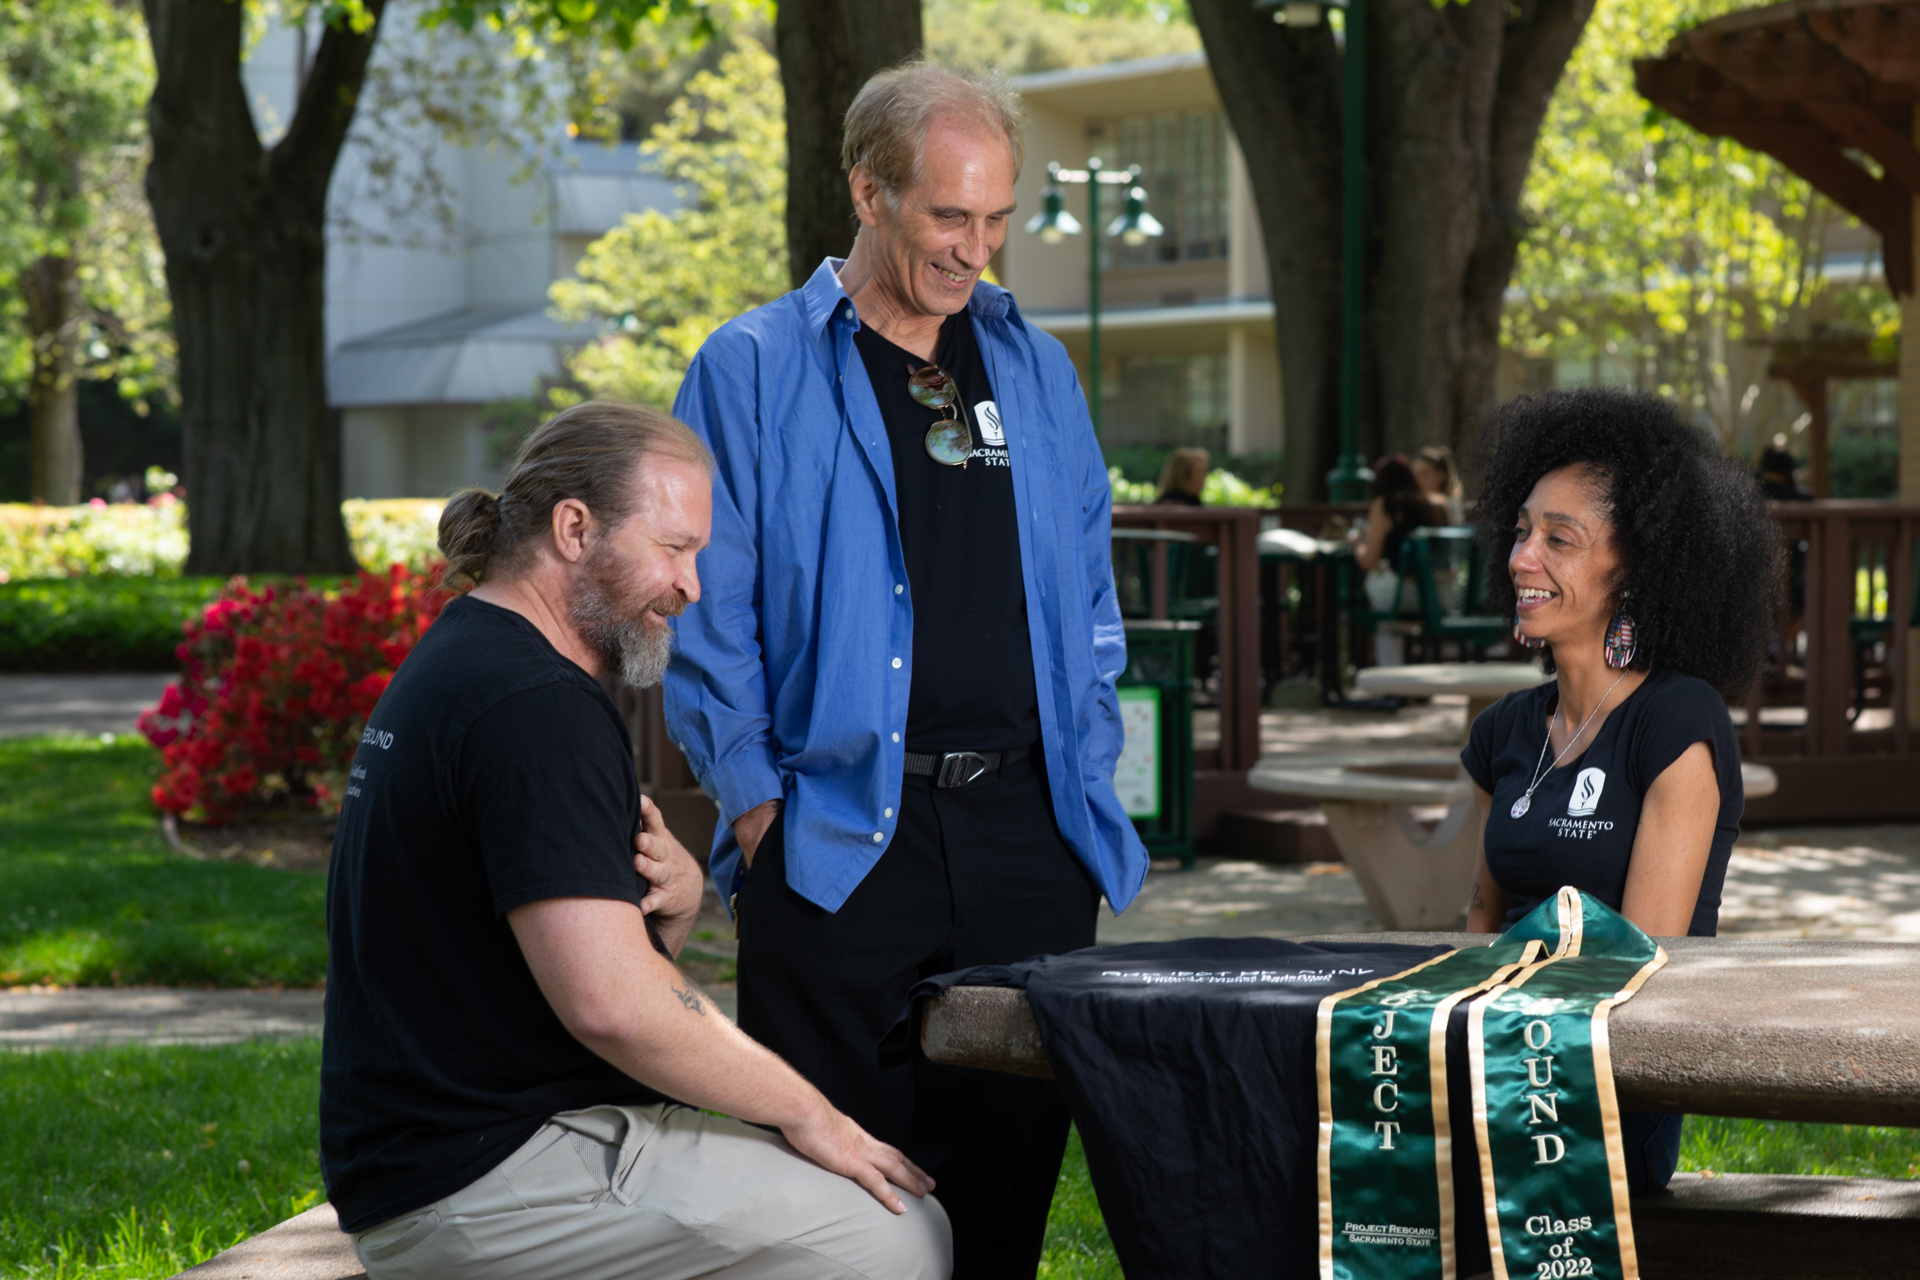 Member of Sacramento State's Project Rebound meet for a chat at a picnic table on campus.